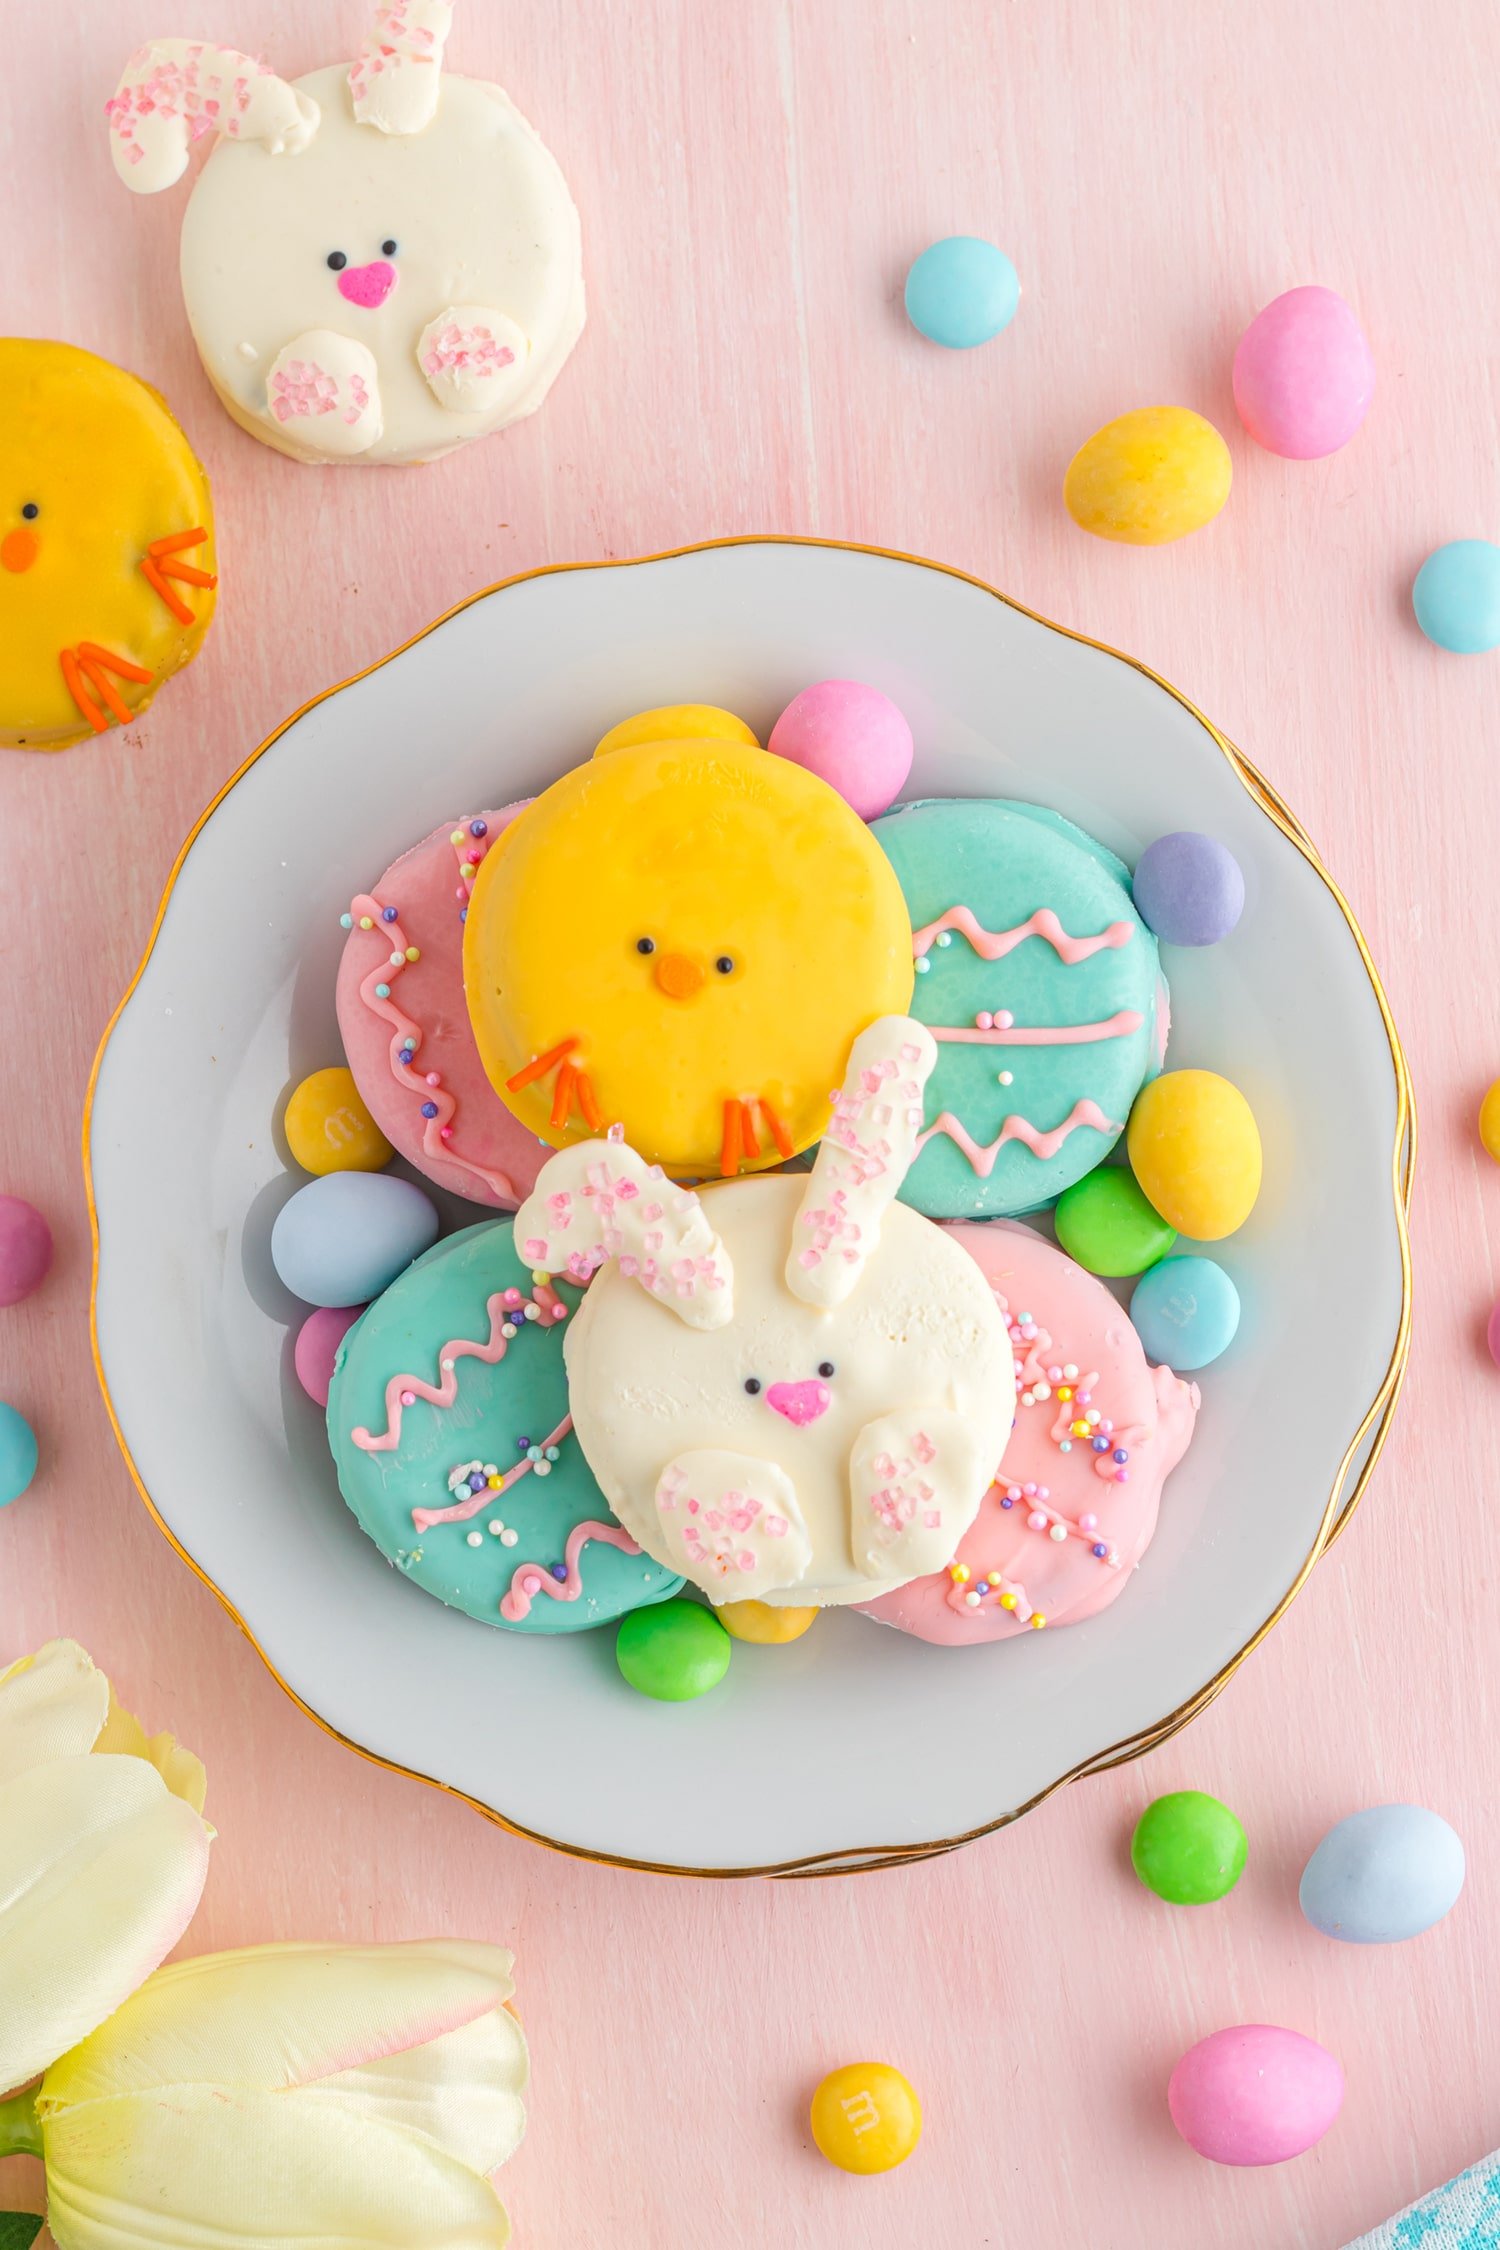 Plate of cute Easter Oreo cookies decorated to look like bunnies and chicks on a pink background